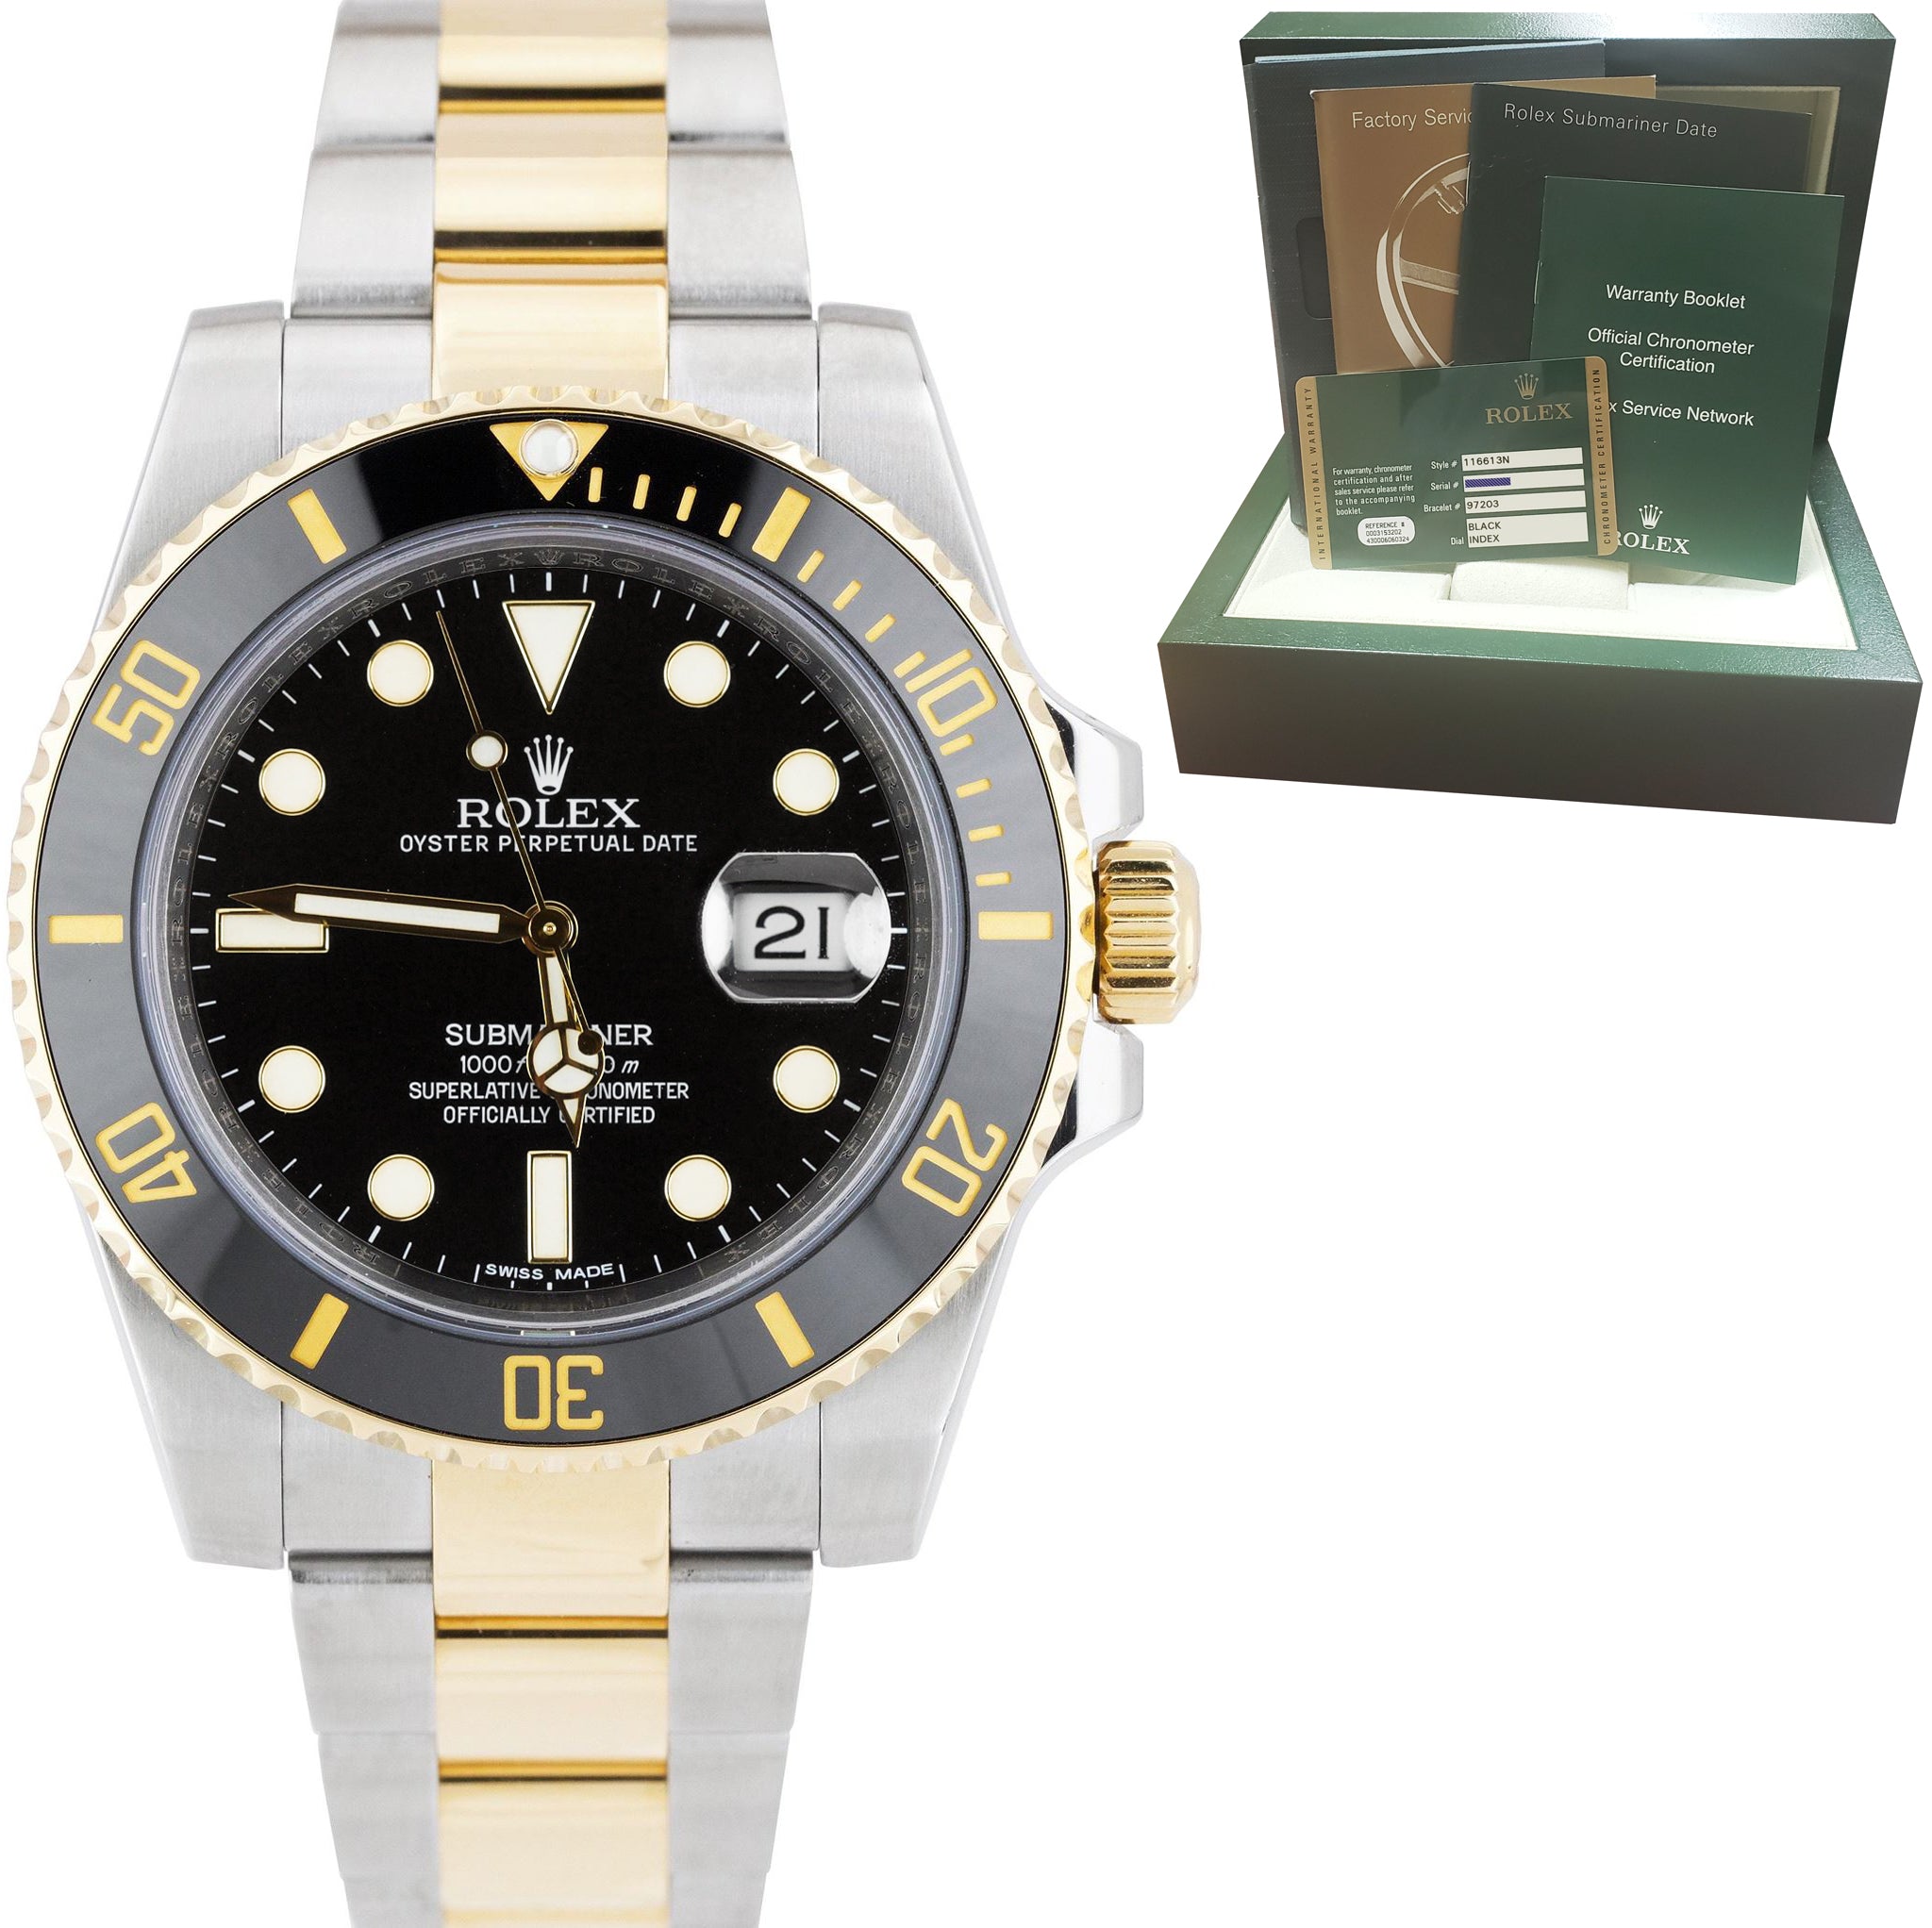 MINT Rolex Submariner Date Ceramic Two-Tone Stainless Gold Black Watch 116613 LN